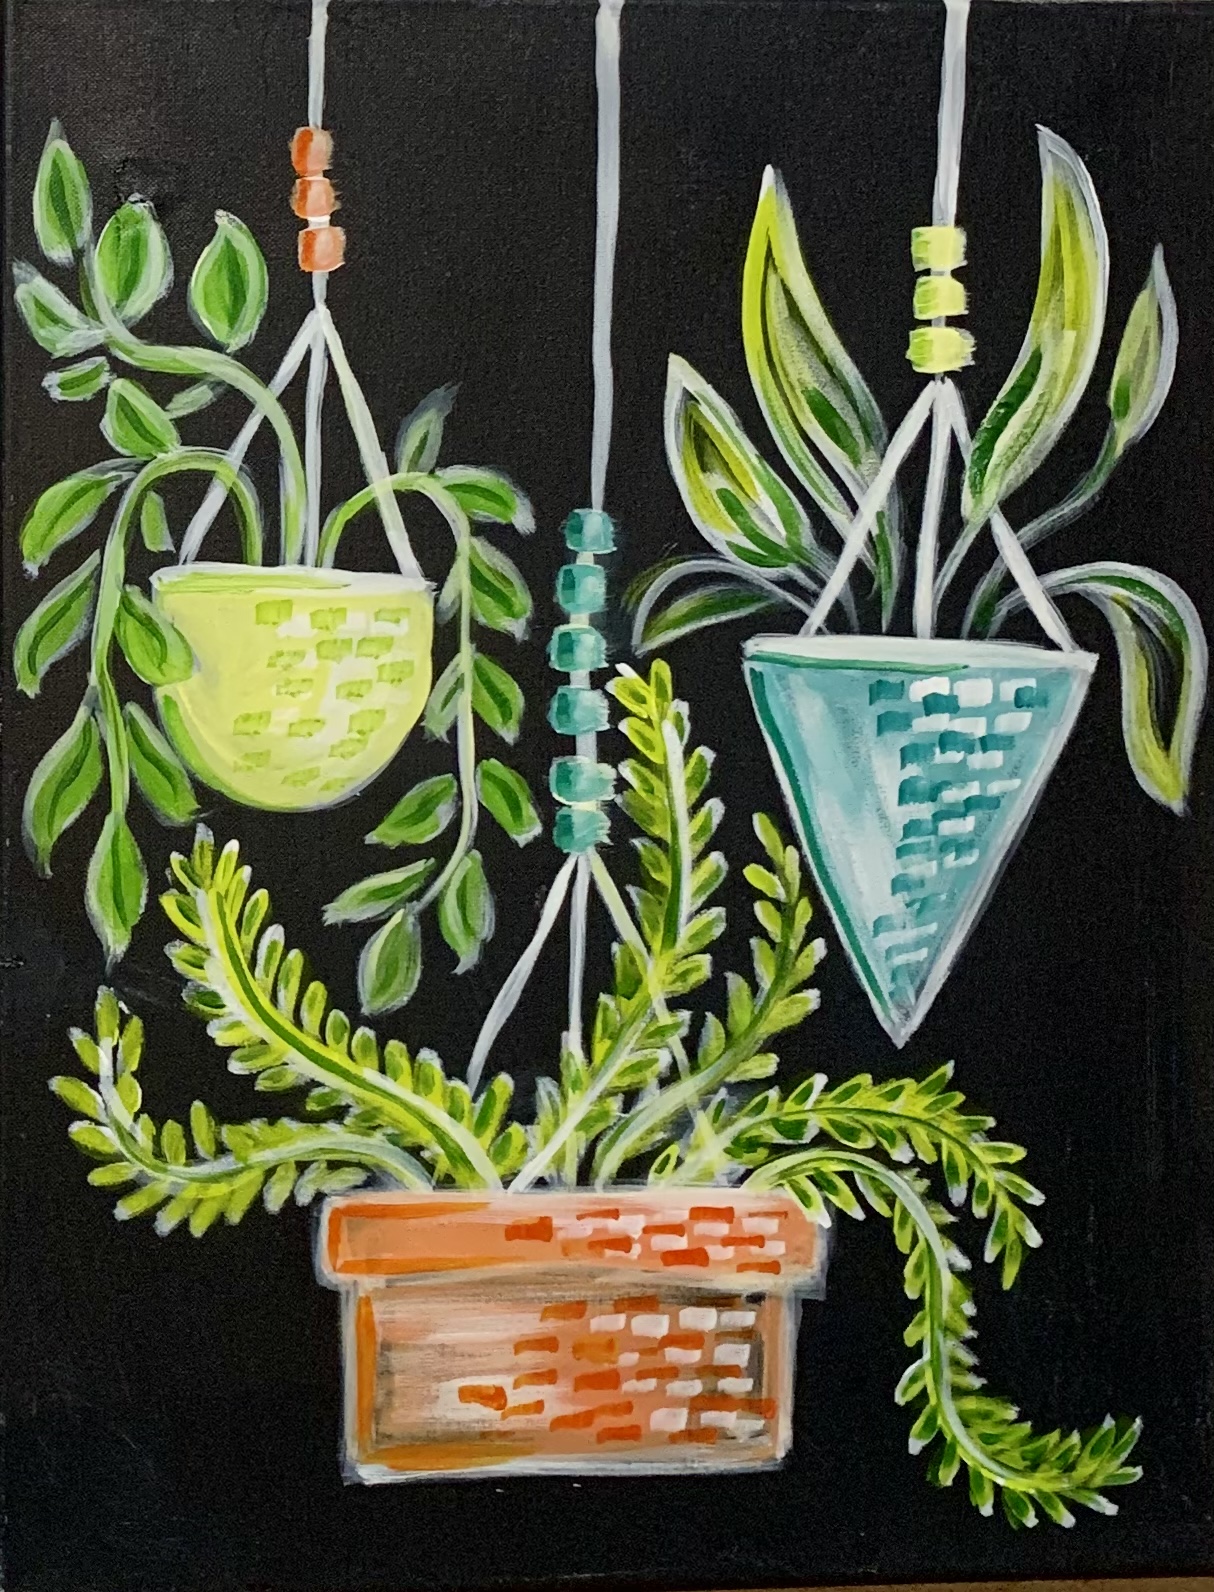 A Hanging Plants trio experience project by Yaymaker